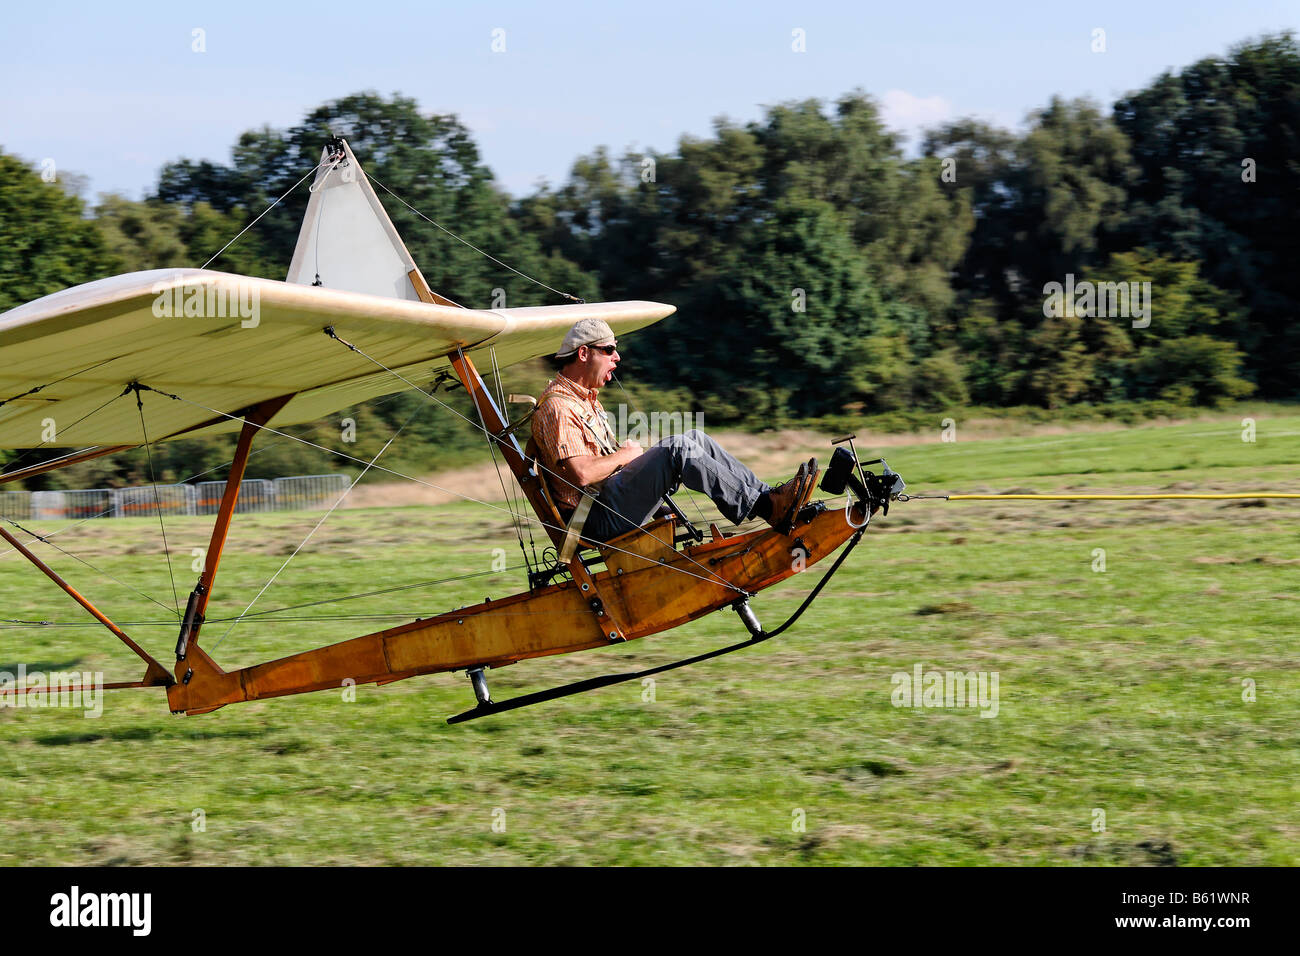 Historic glider SG38 being pulled on a cable into the air, wooden construction with an open seat, glider to train beginners fro Stock Photo